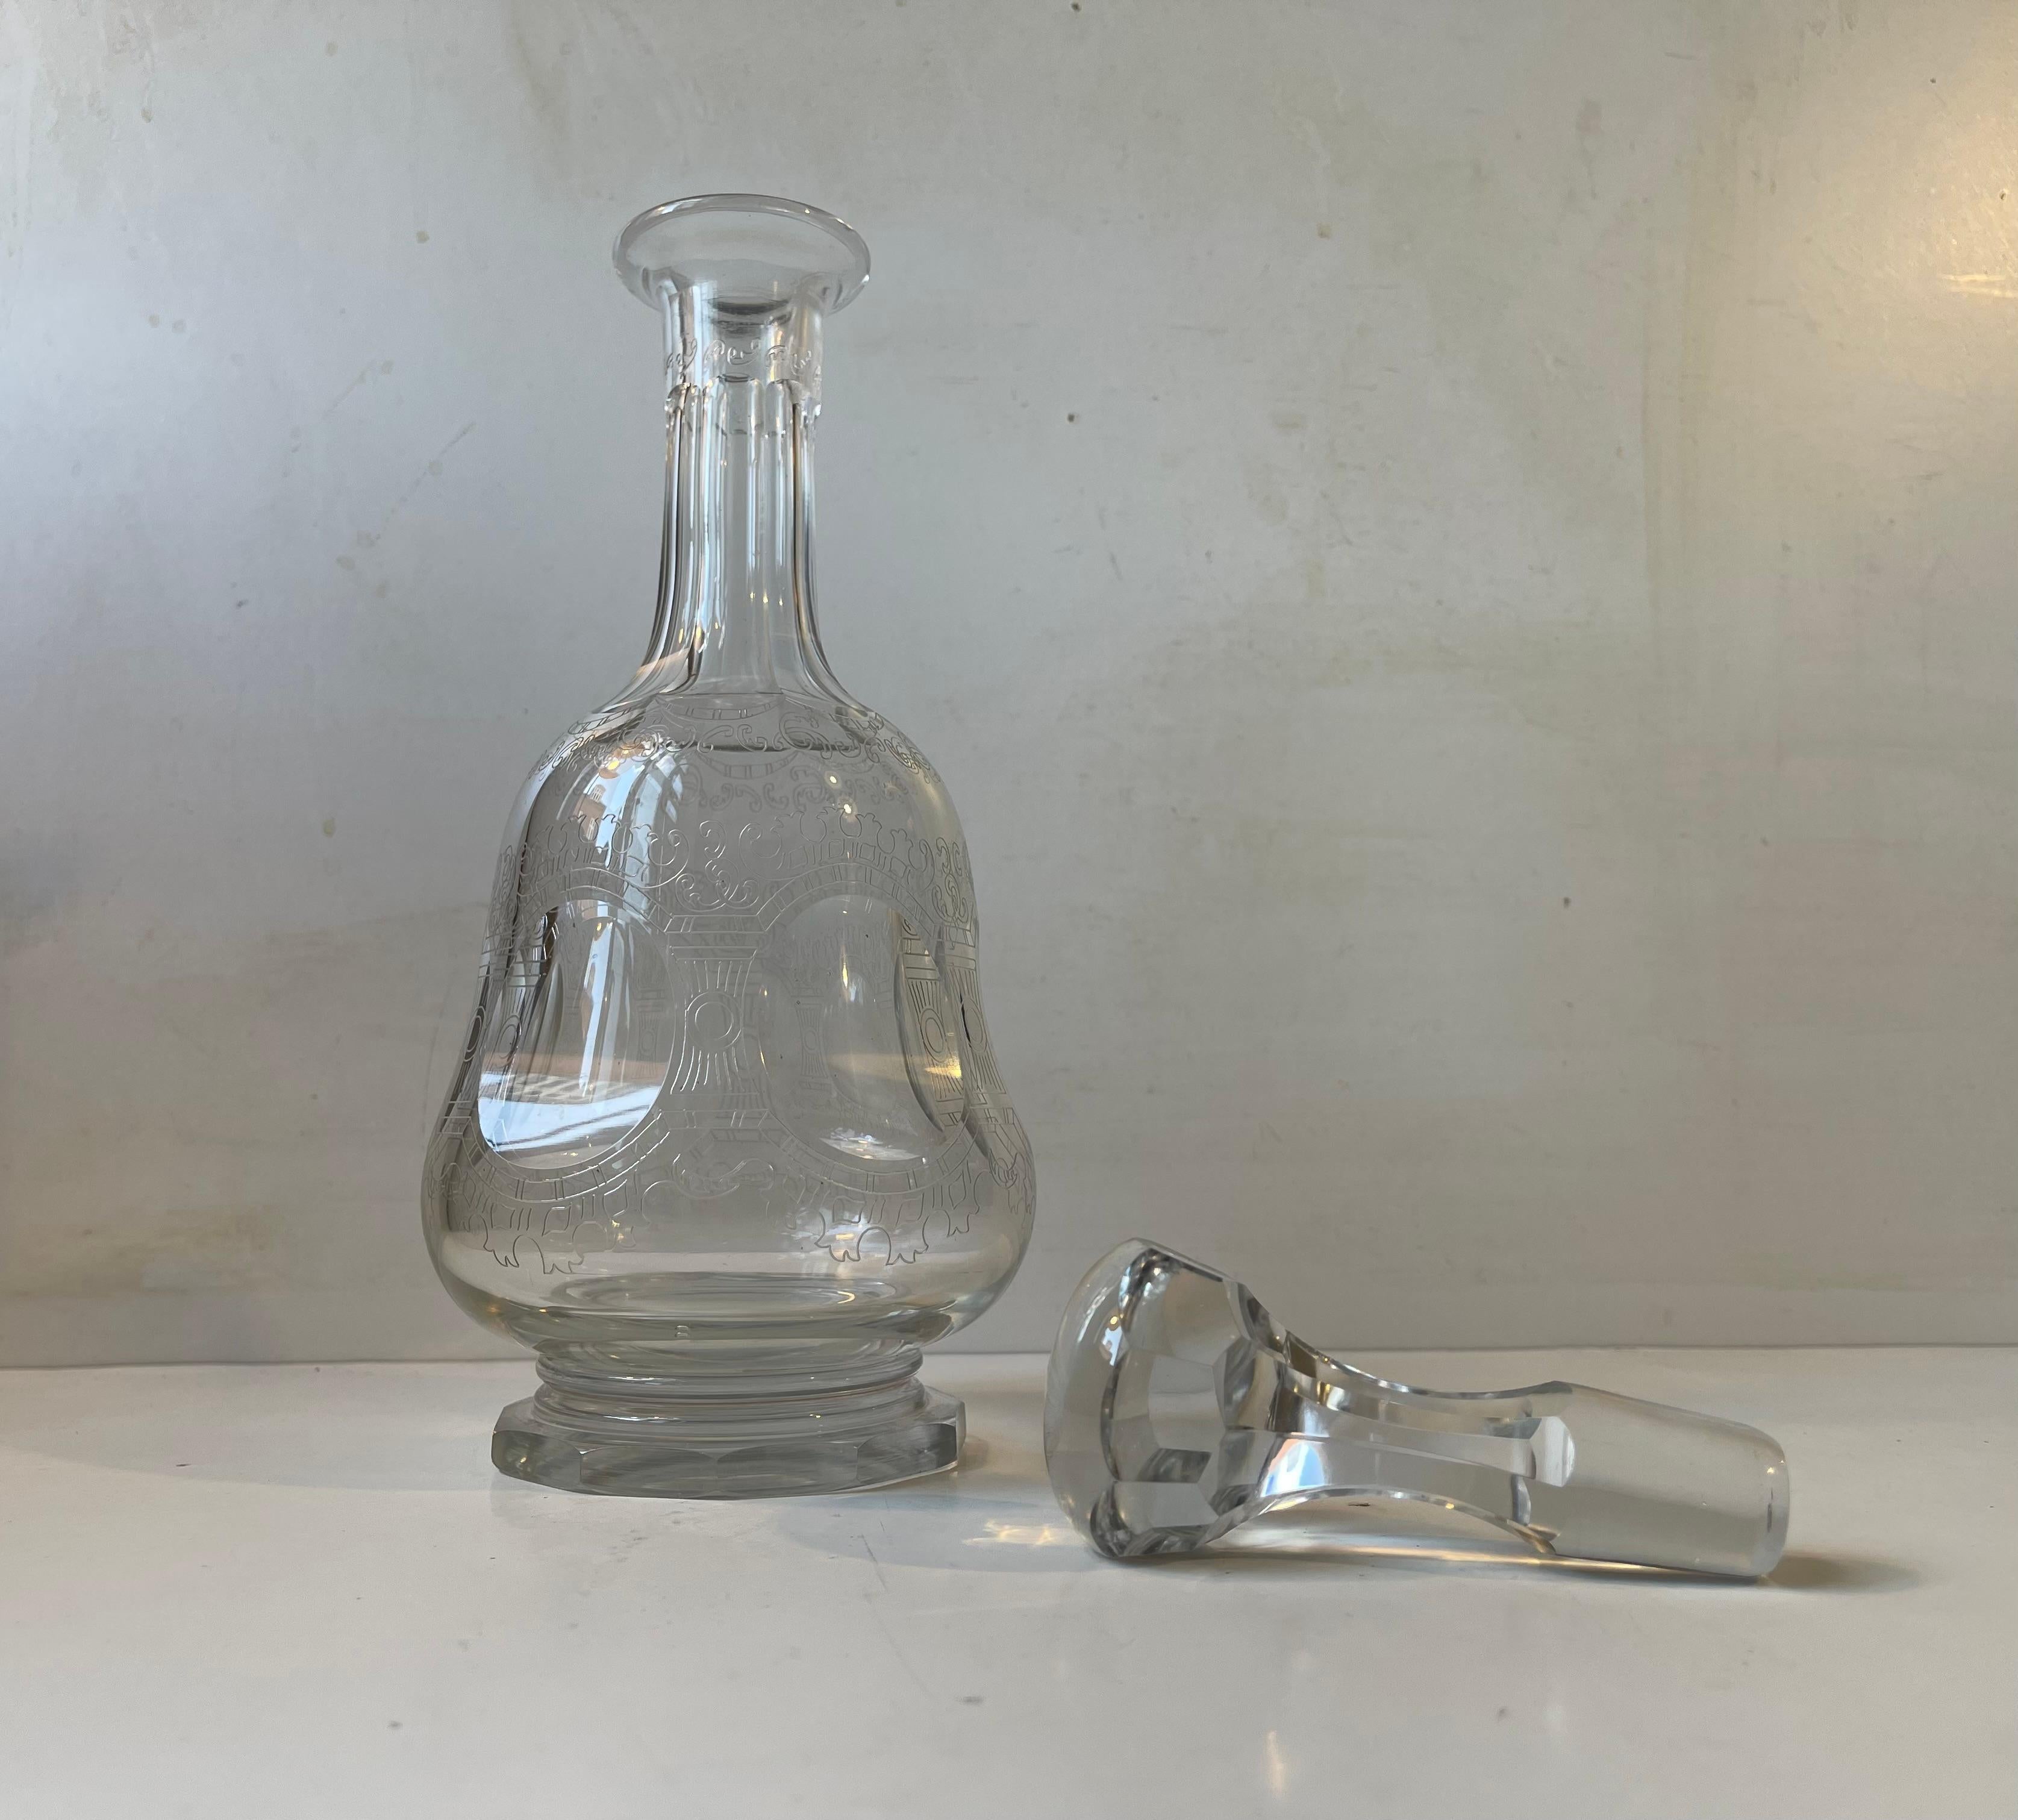 Catalogued as Gallaservice 'Royal Banquet Service' this exceptionally rare decanter is exibited without the stopper at the Danish glass Museum Hardernet and described in the book Royal Glass 'Kongelig Glas' by Ole Villum Krog from 1996. This crystal